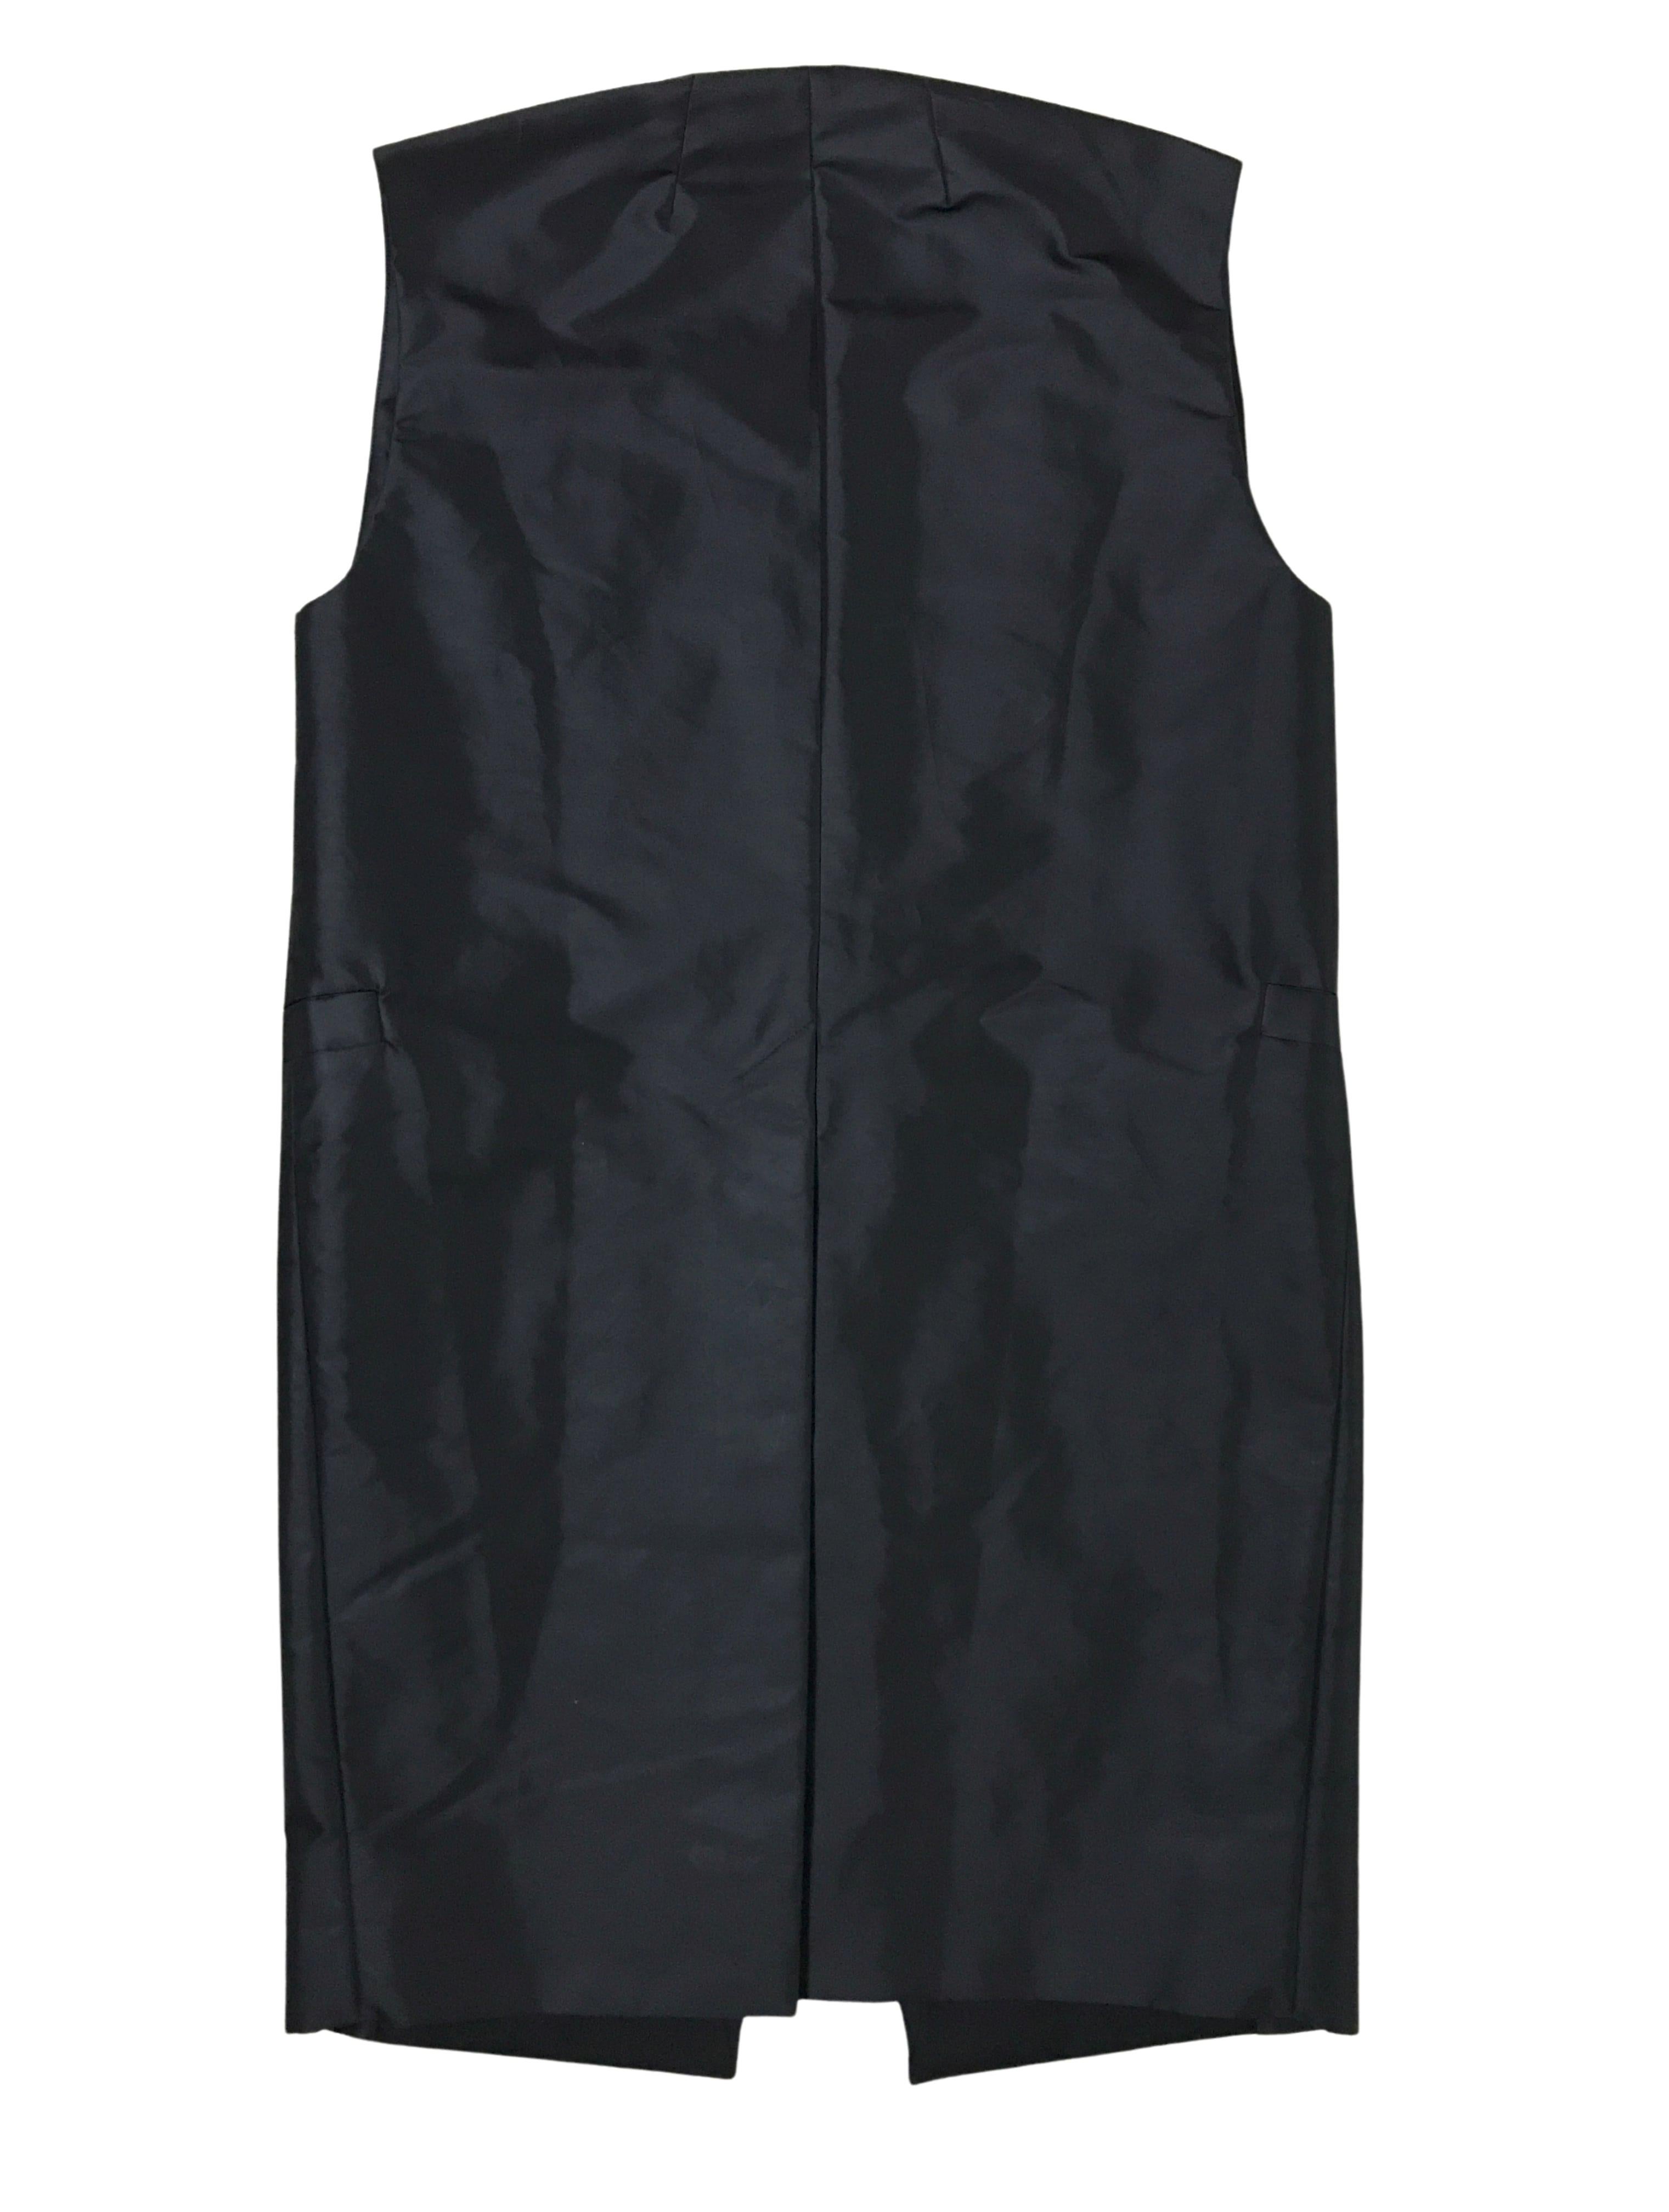 Rick Owens Sleeveless Panelled Overcoat, Spring Summer 2016 In Good Condition In Tương Mai Ward, Hoang Mai District